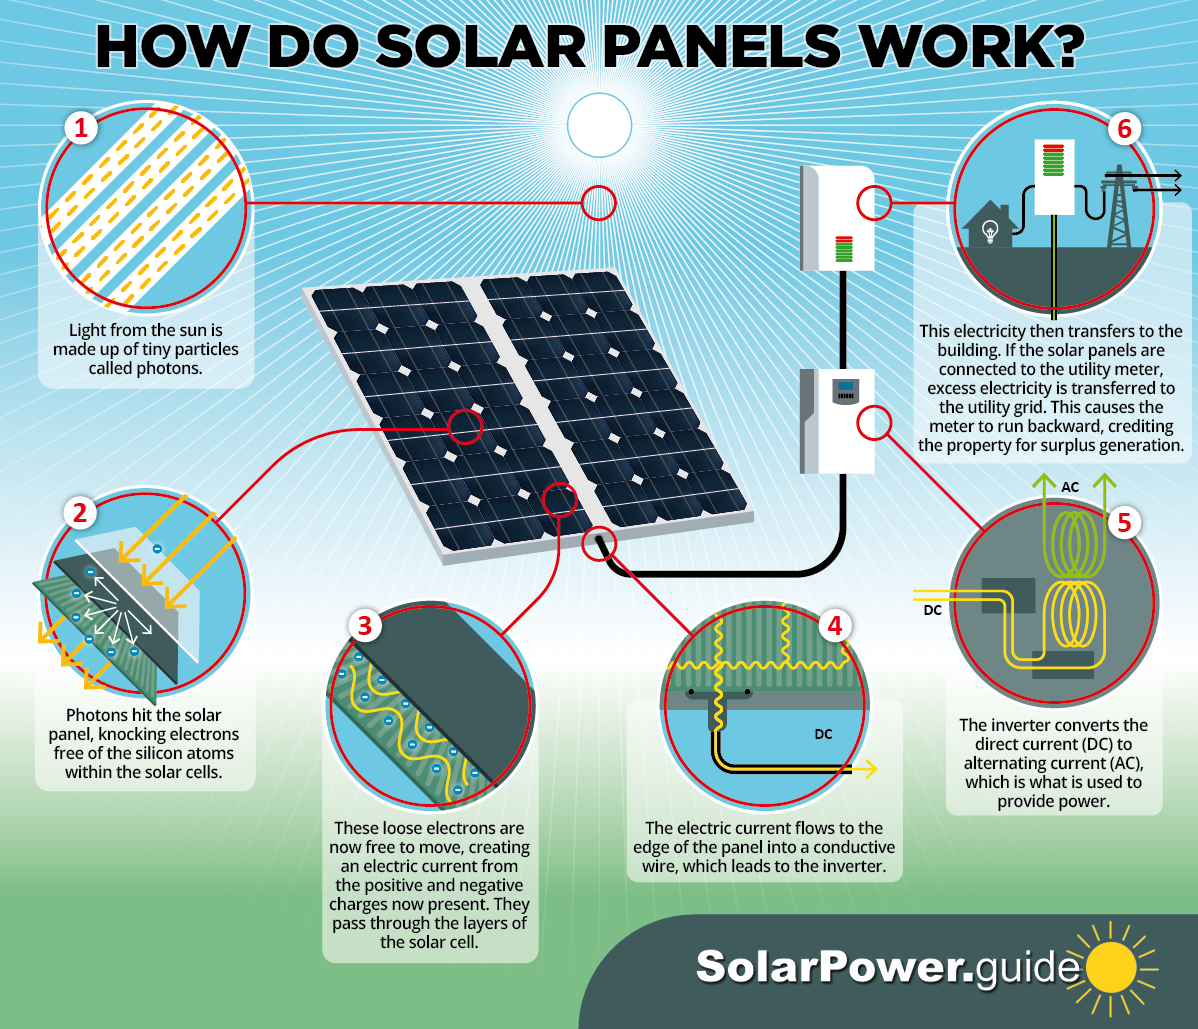 This image helps to show How Do Solar Panels Work?